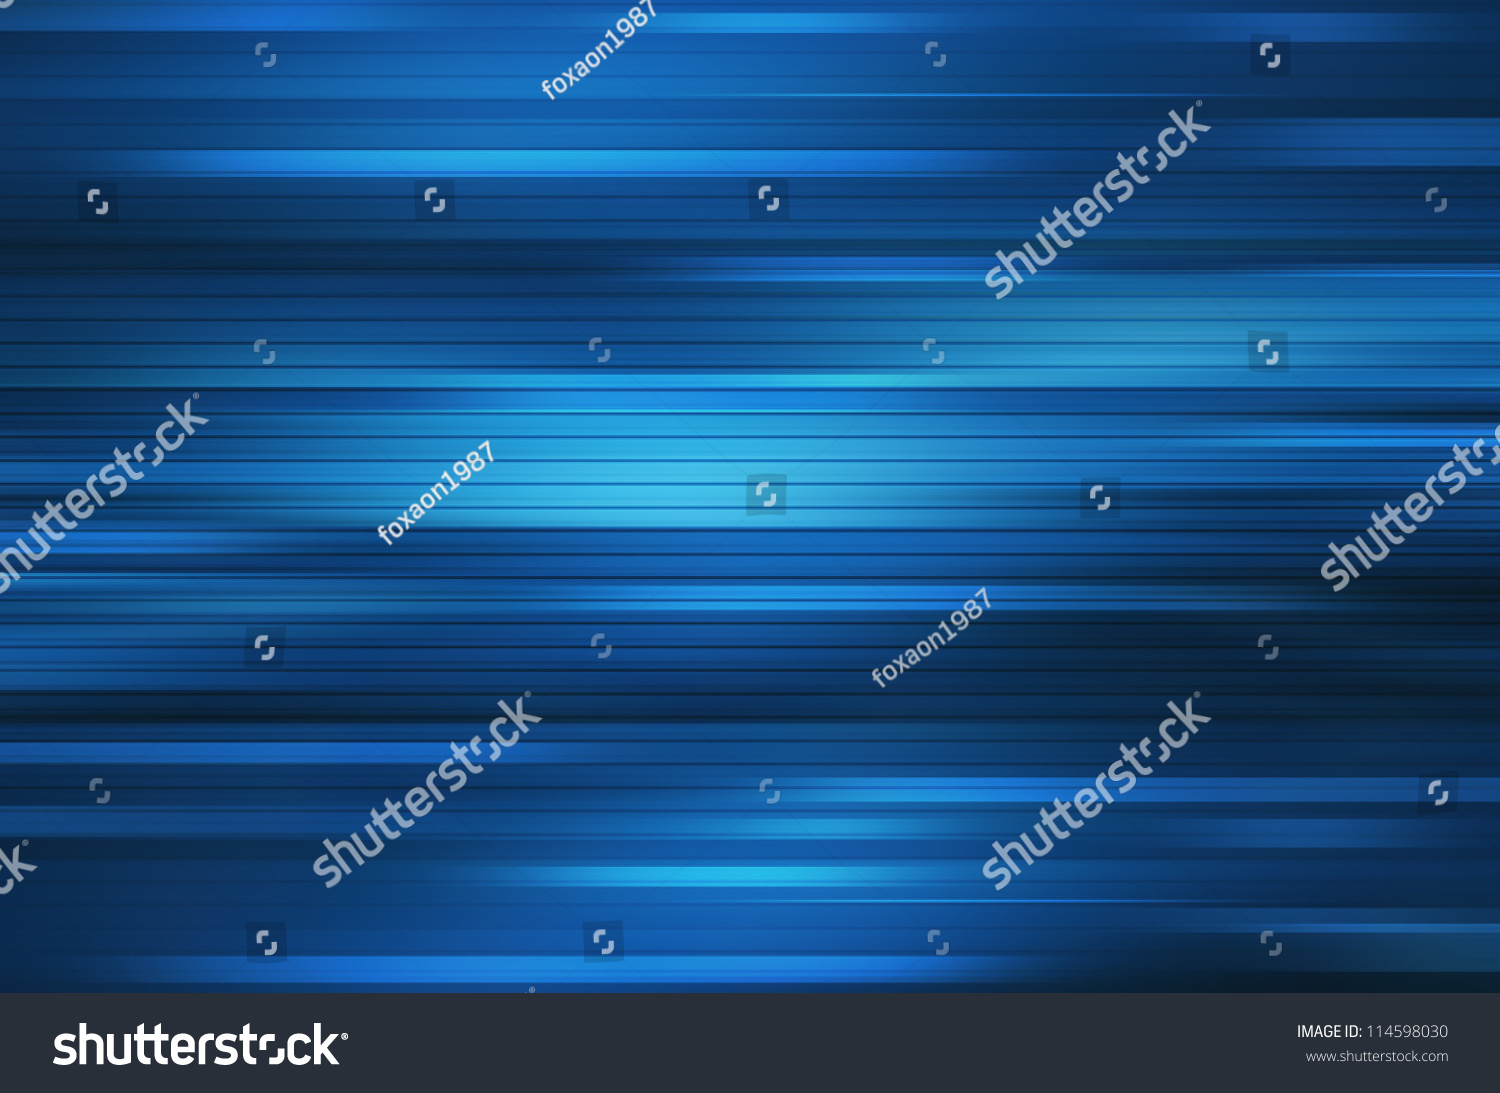 Blue Lines Background Stock Photo 114598030 : Shutterstock